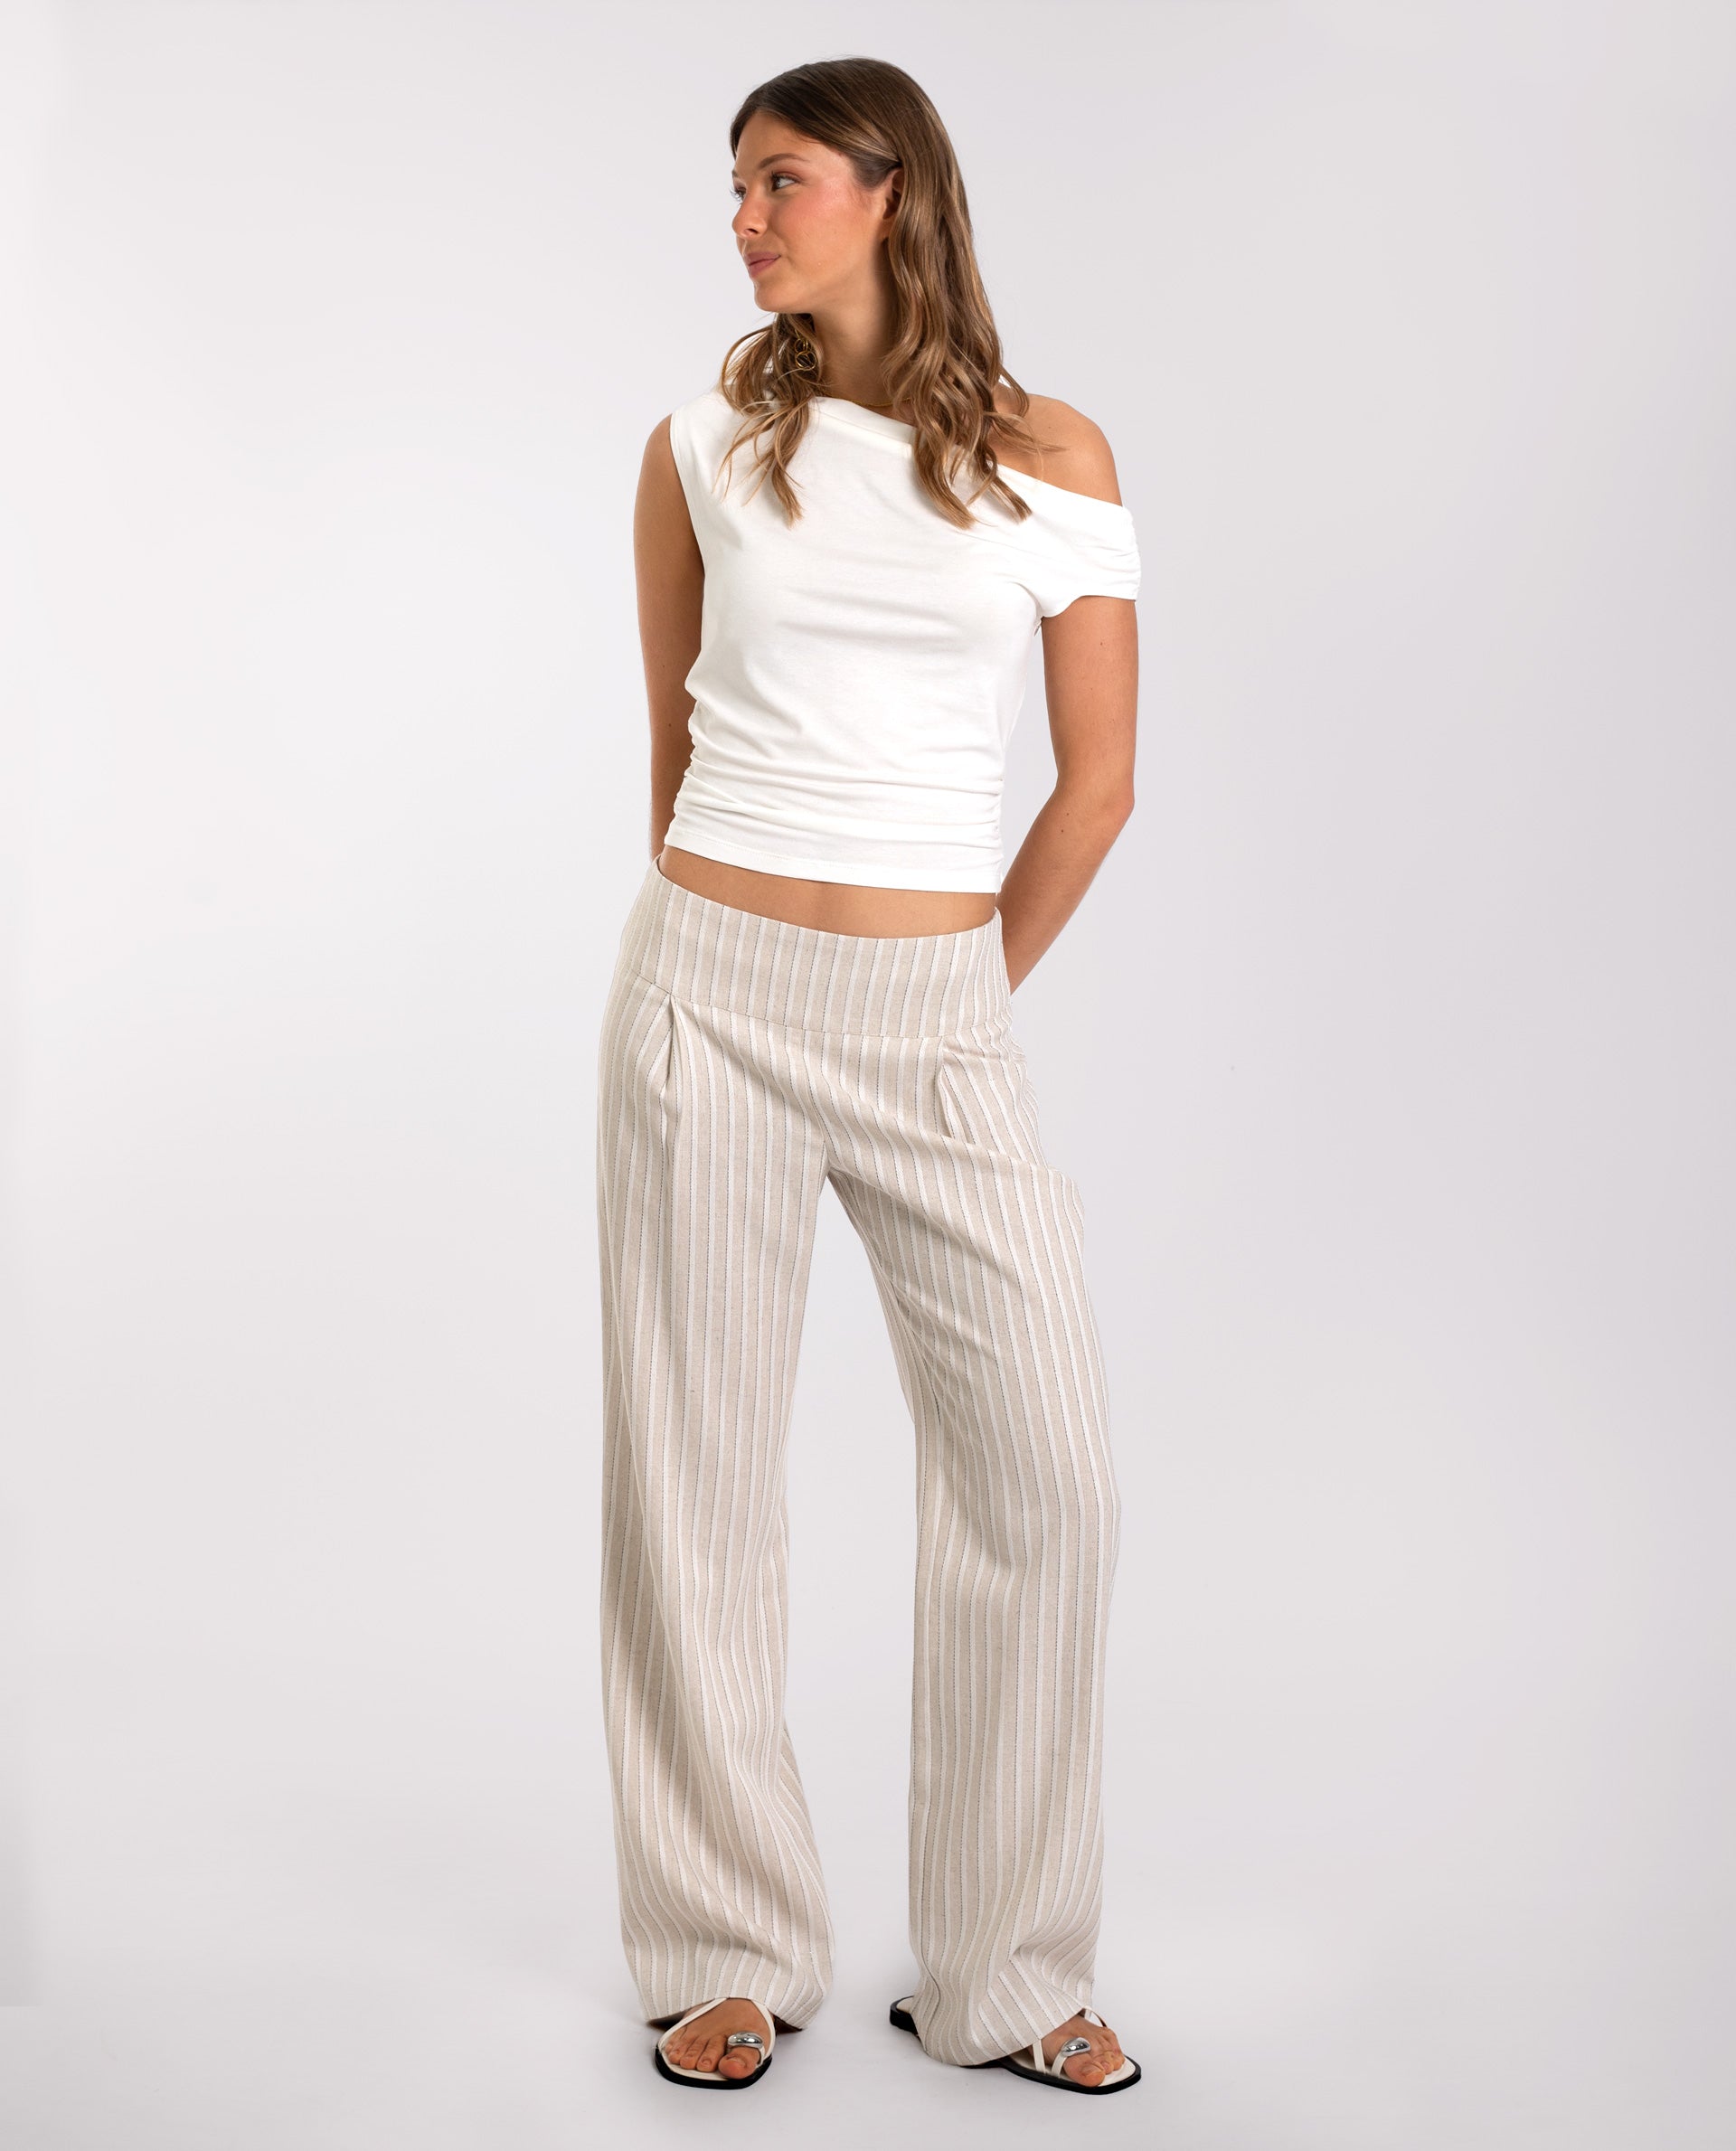 SINTRA PANTS - WHITE AND BEIGE